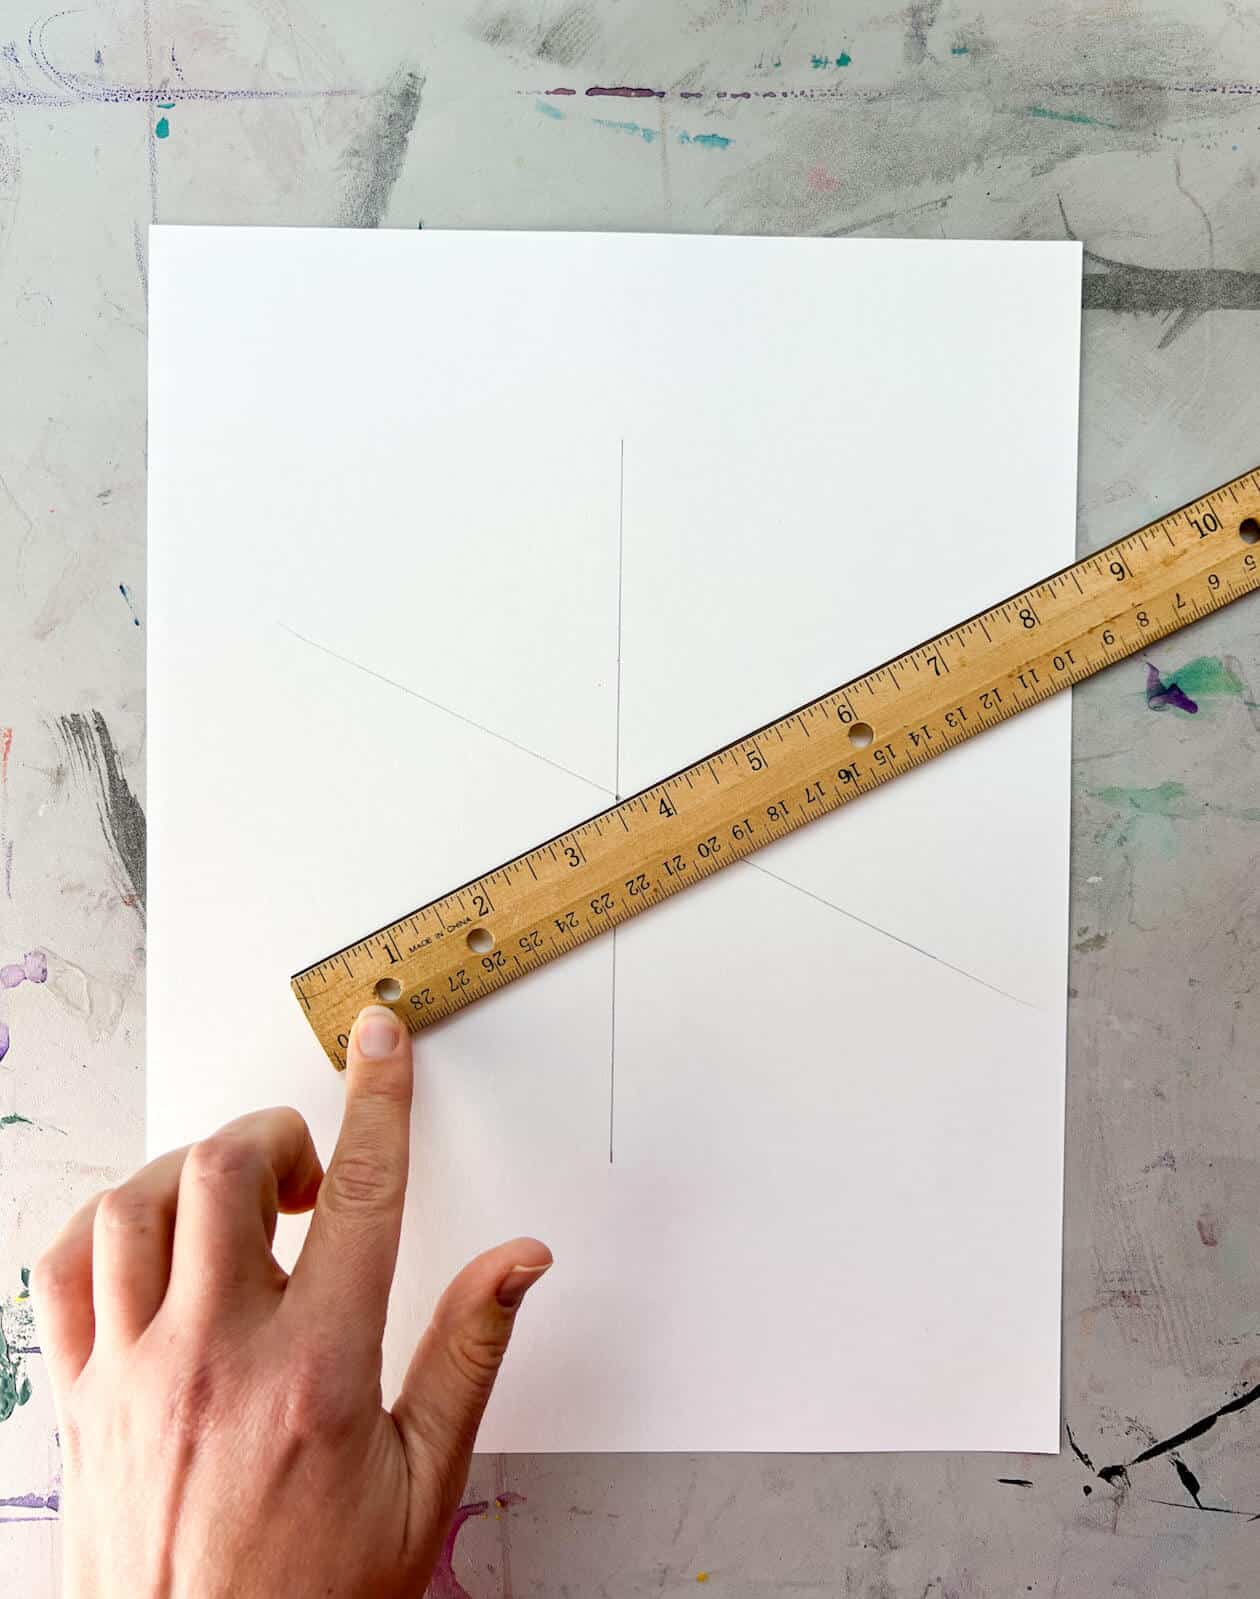 hand holding ruler to draw diagonal line.